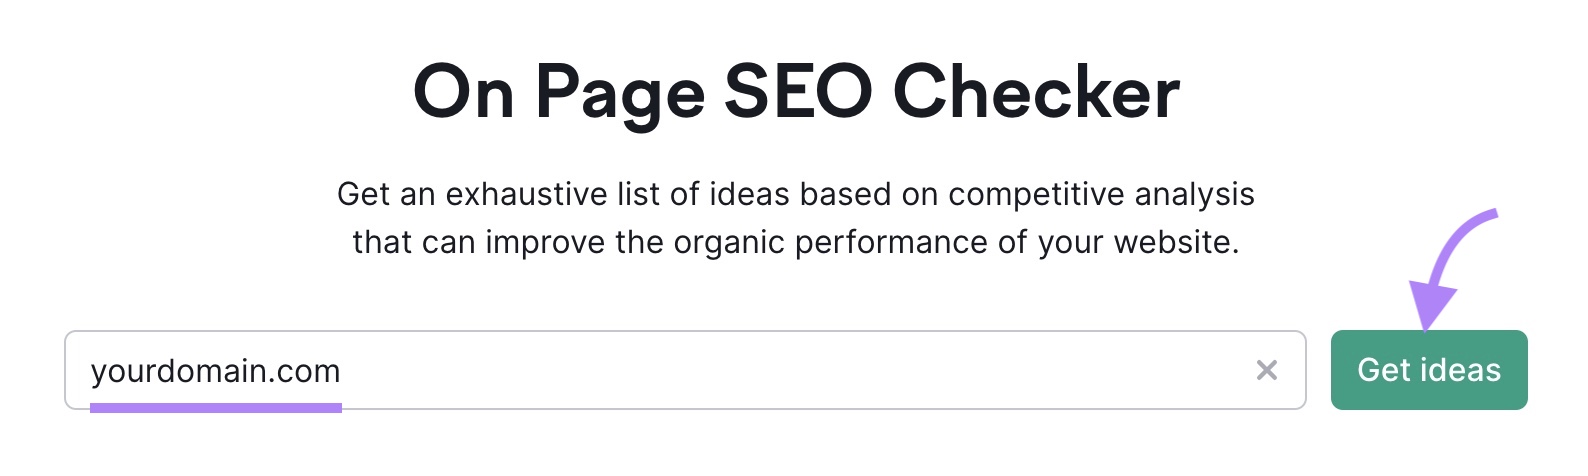 On Page SEO Checker tool-start with a domain entered and the "Get ideas" button clicked.